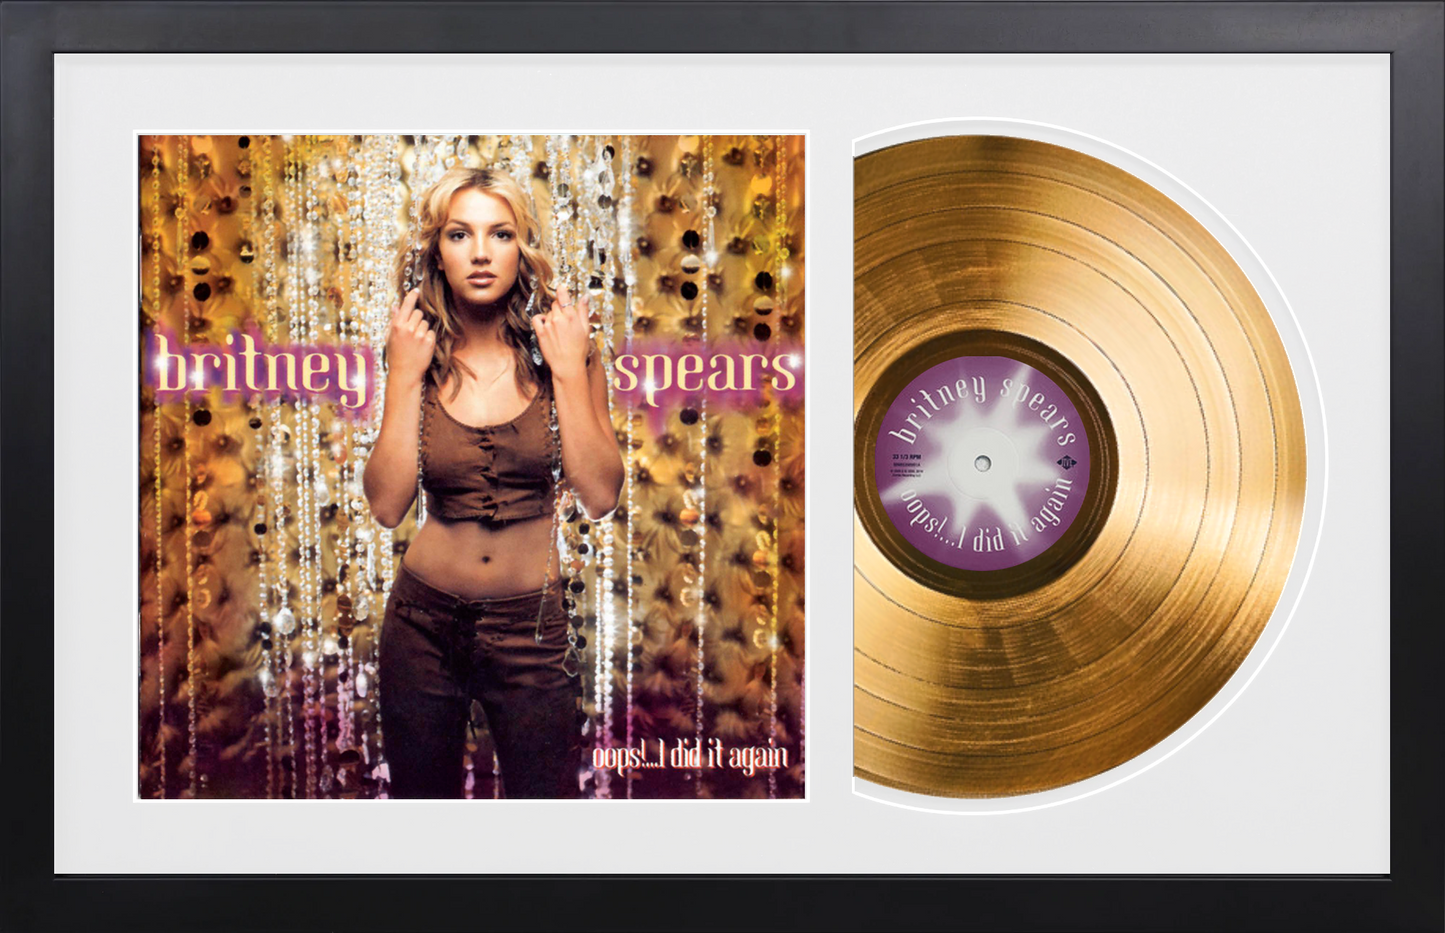 Britney Spears - Oops!... I Did it Again - 14K Gold Plated, Limited Edition Album